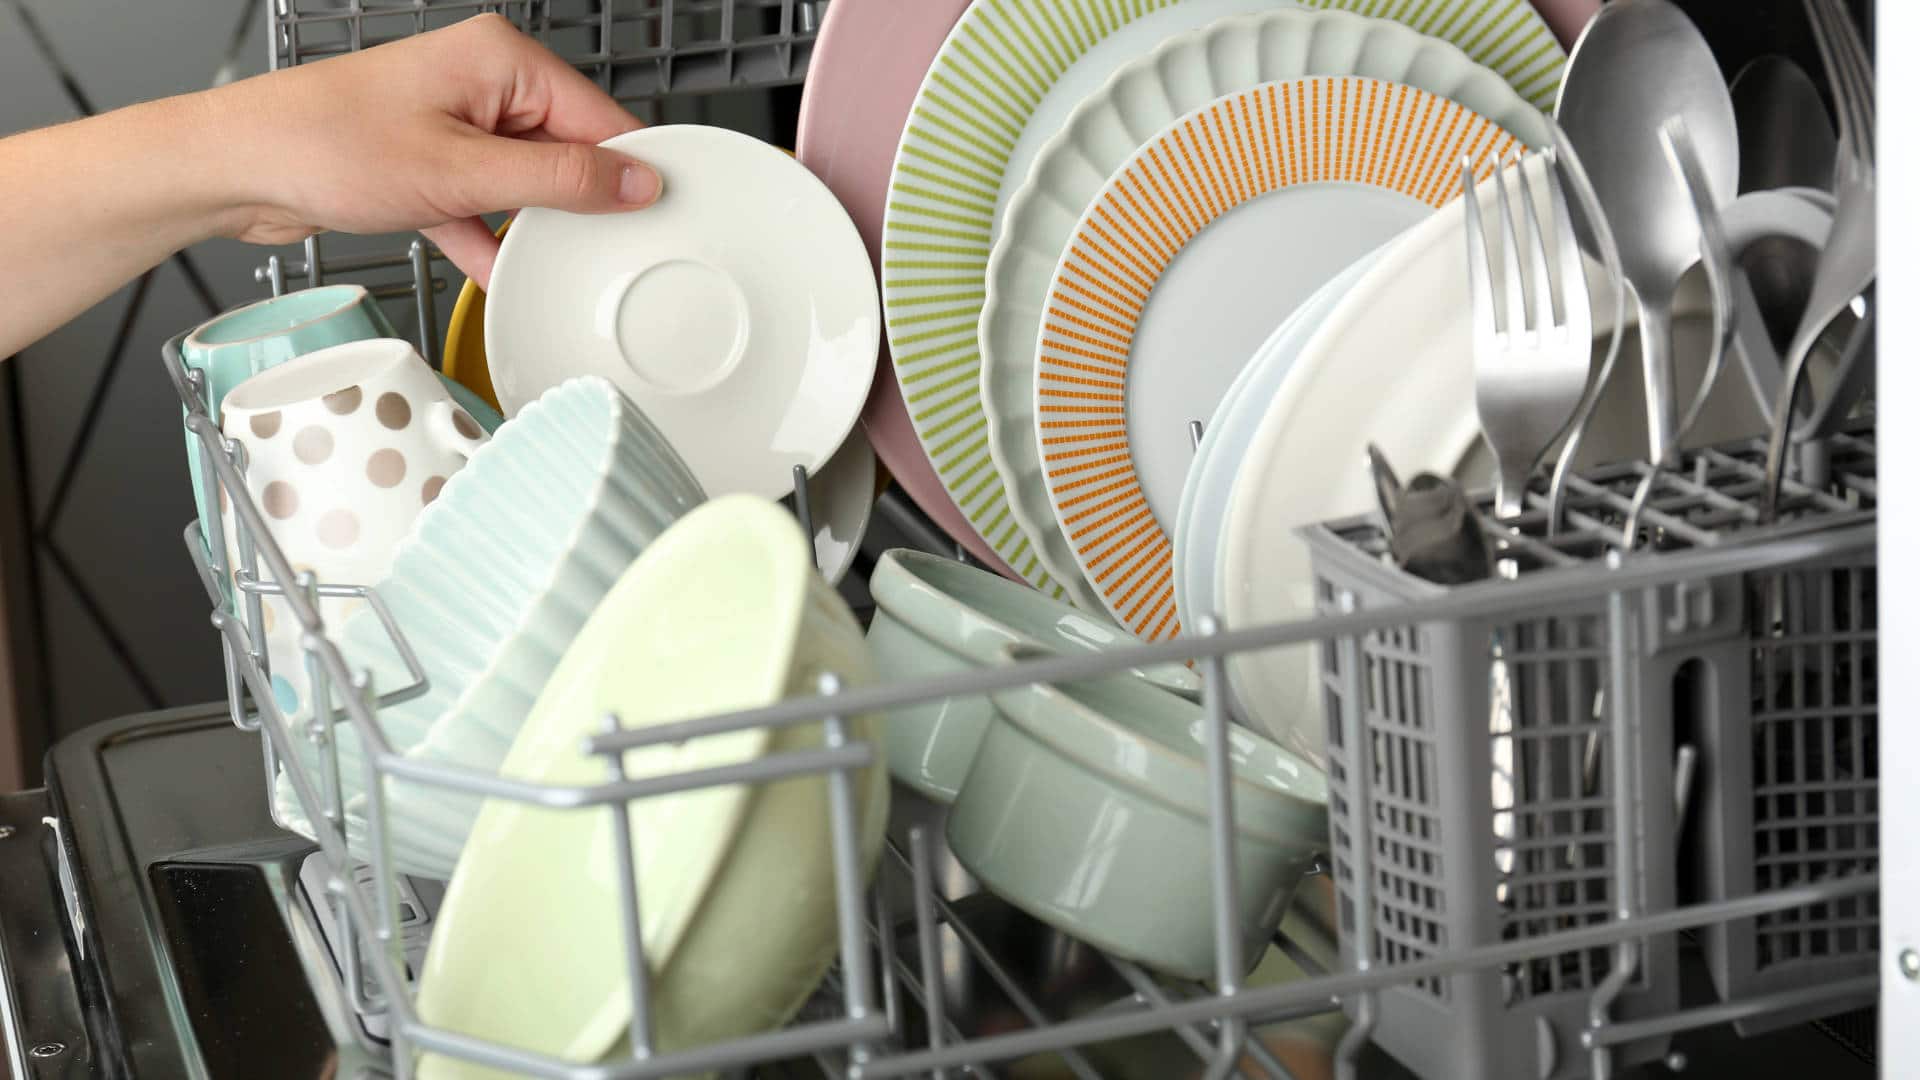 How to Keep Your Dishwasher Clean